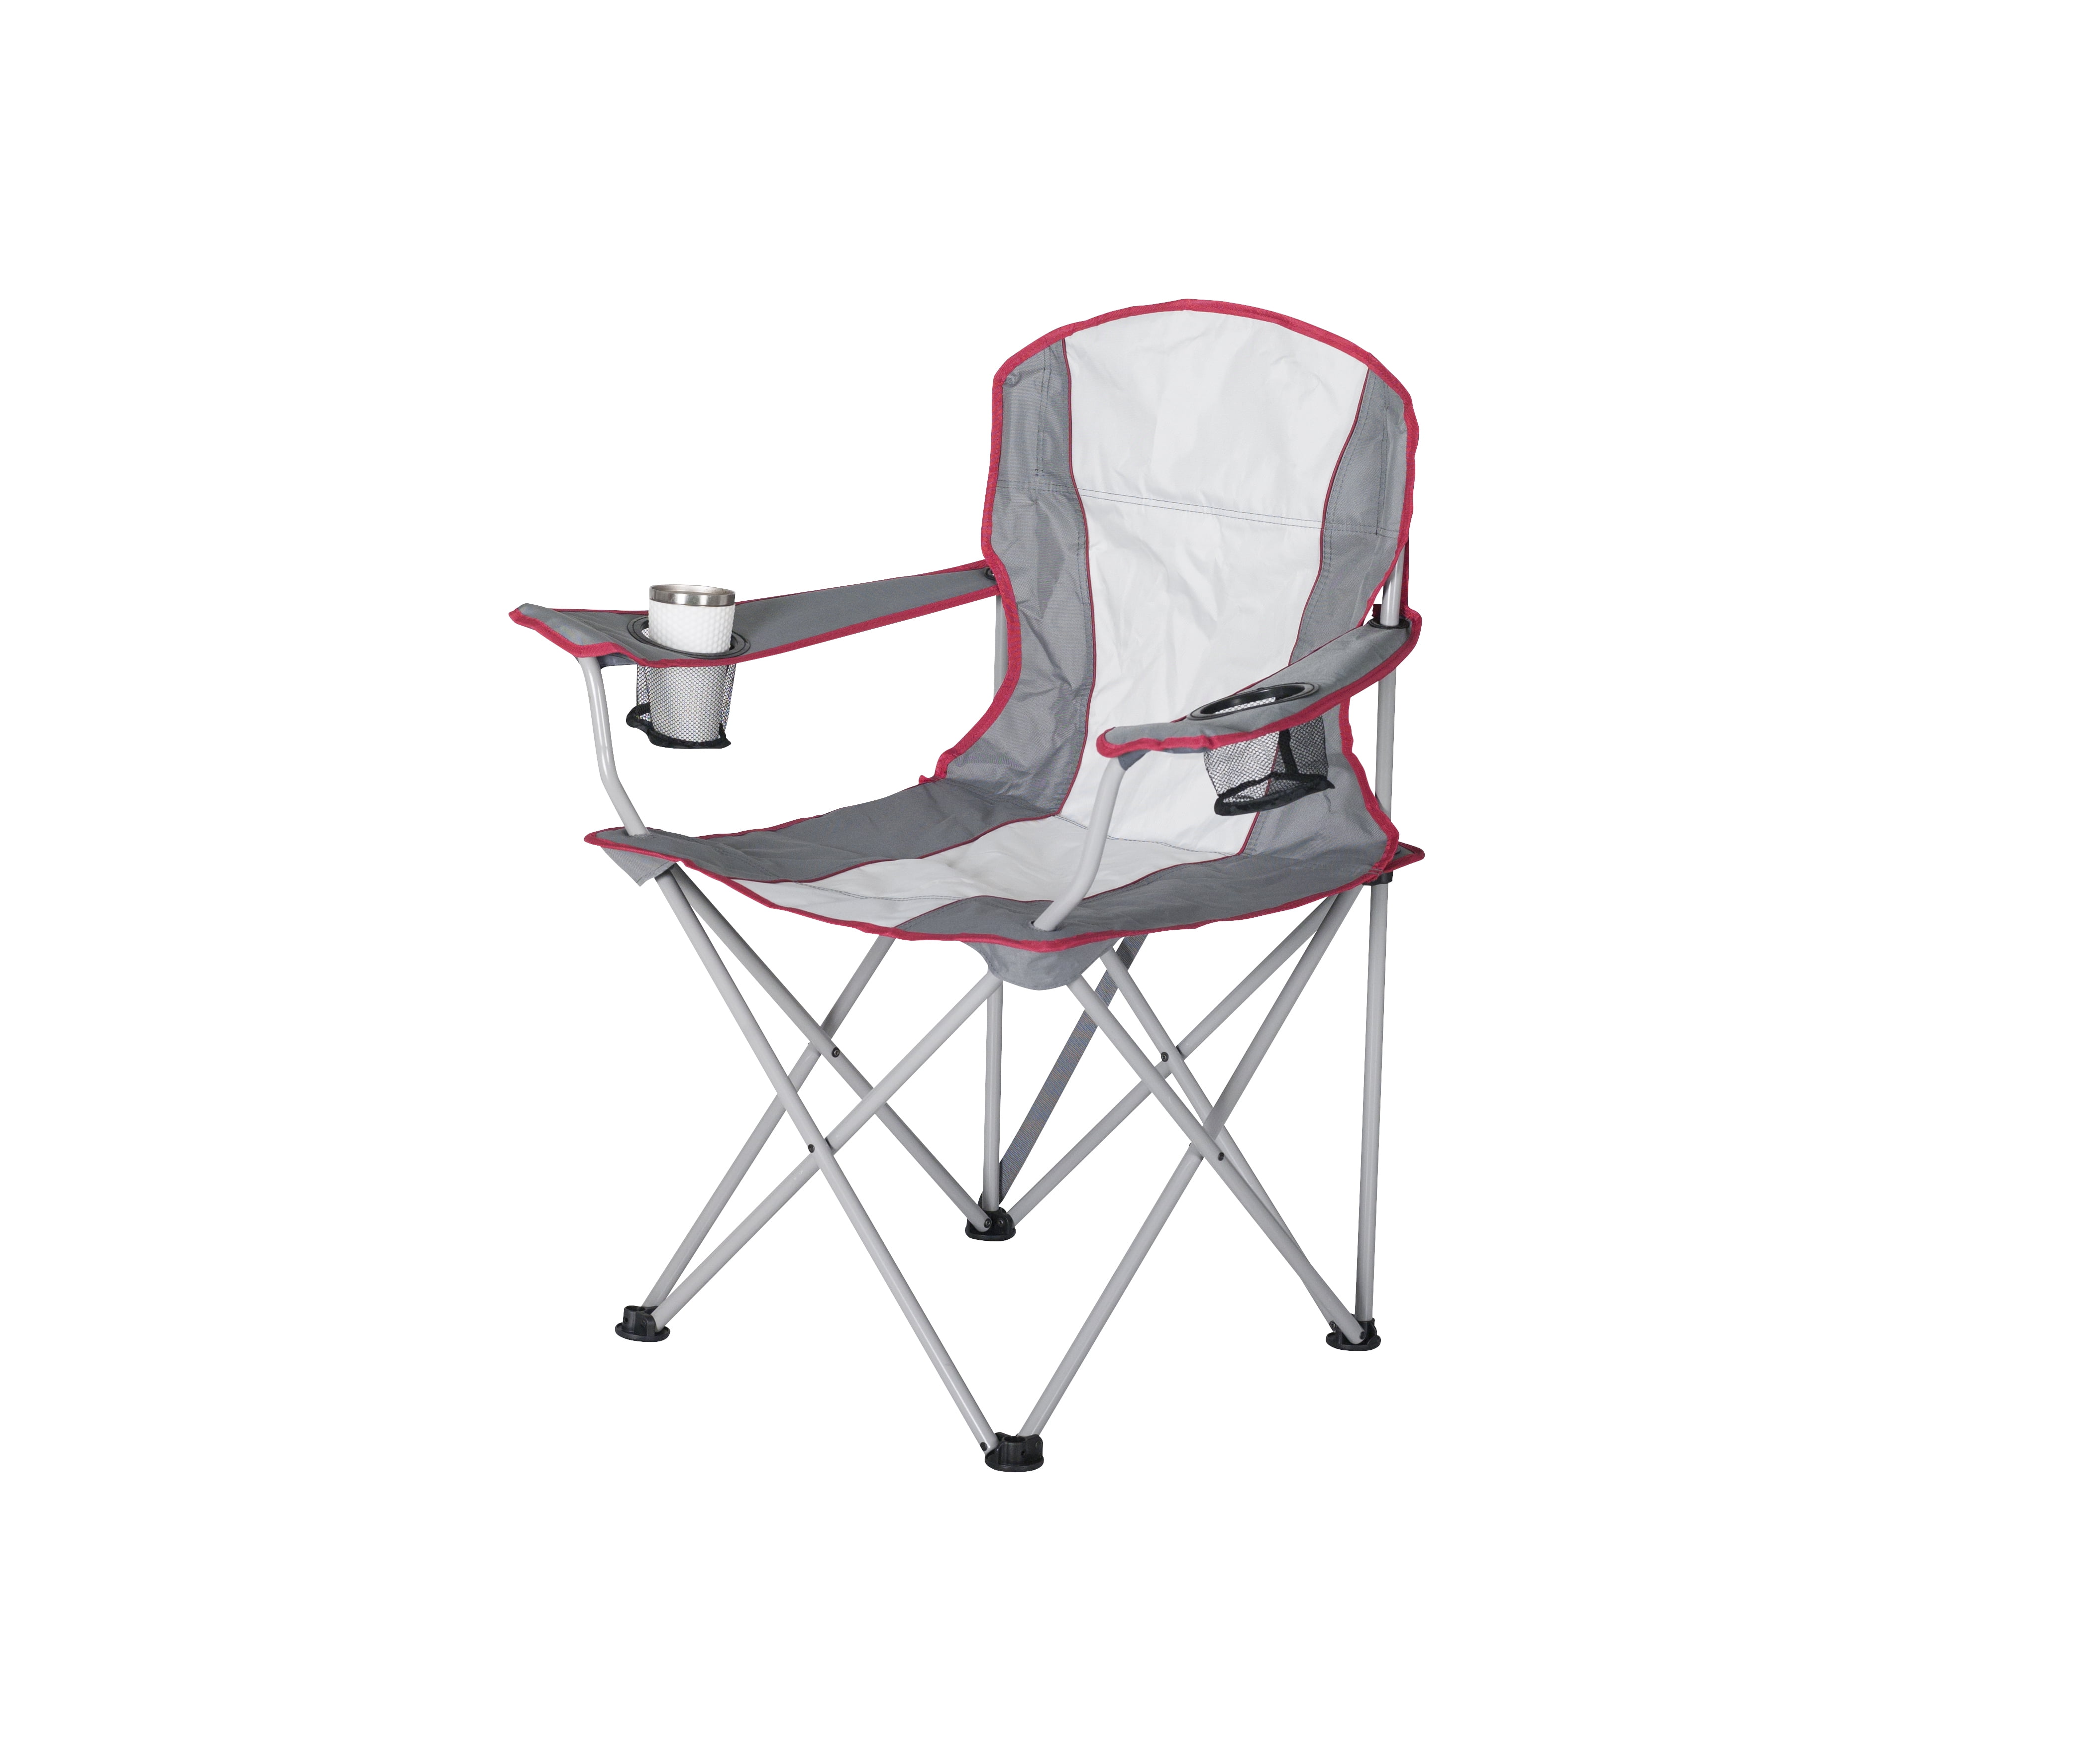 Ozark Trail, Oversized Quad Chair, Adult, Off White & Grey